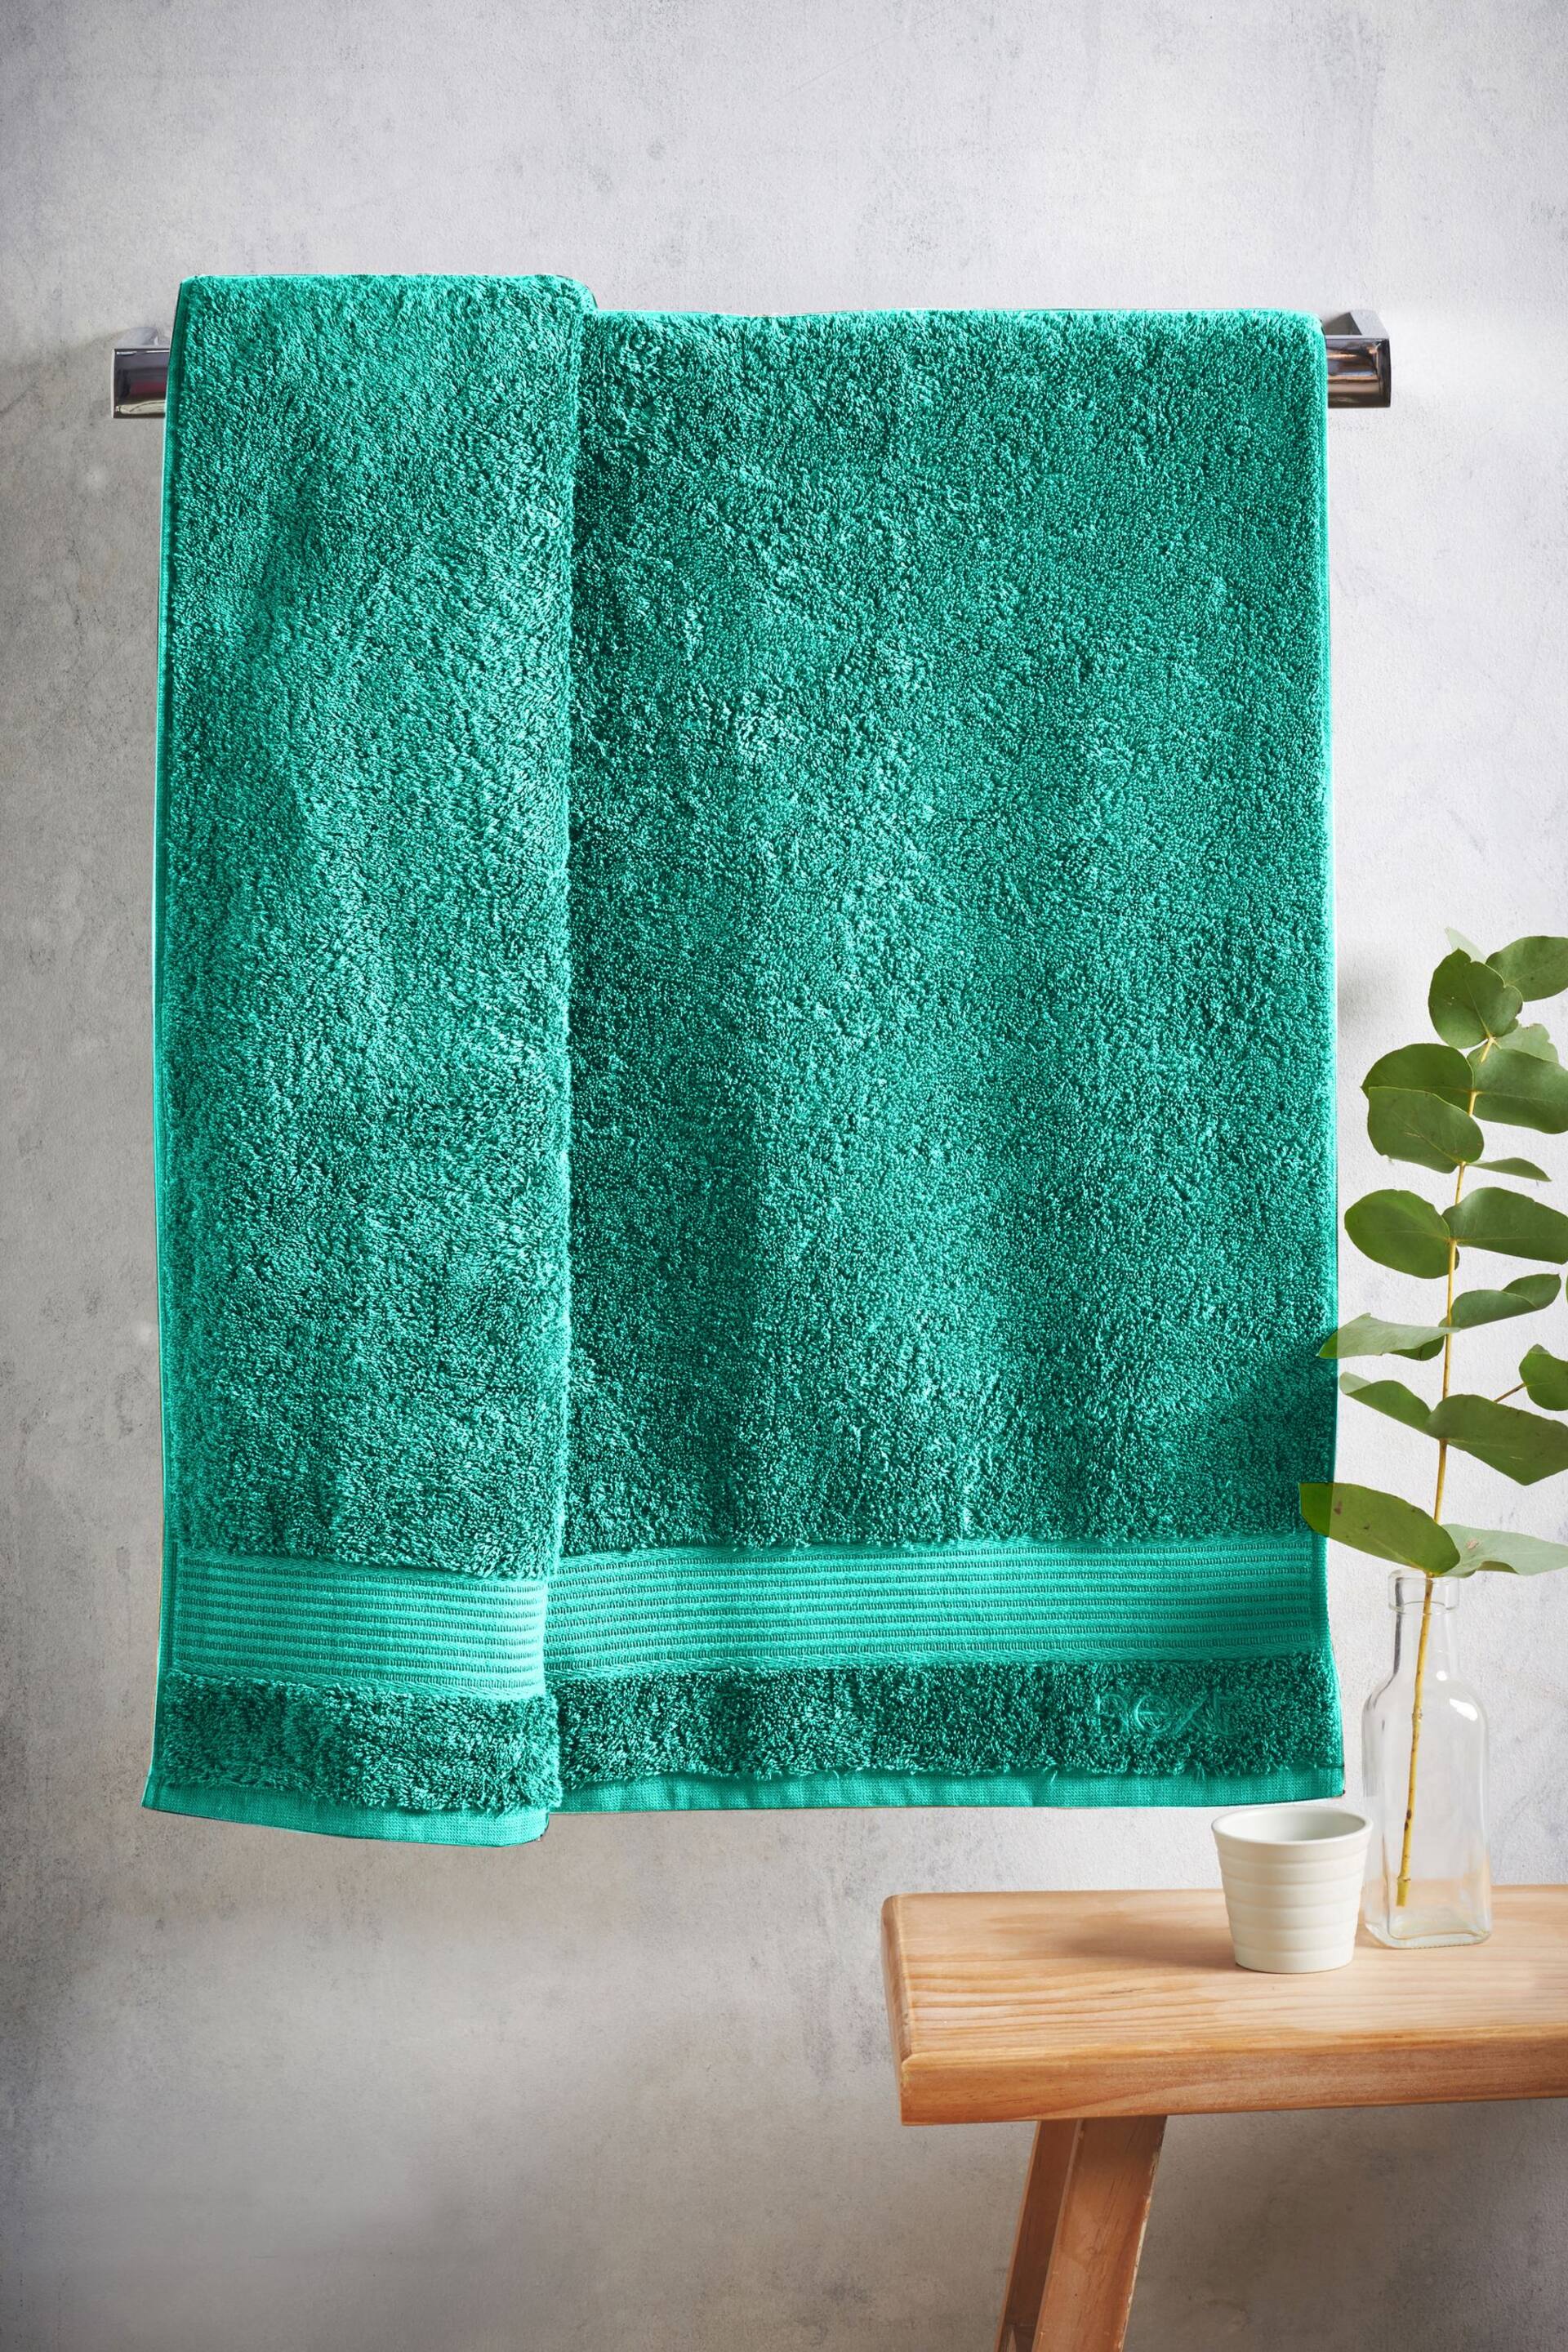 Green Bright Egyptian Cotton Towel - Image 2 of 4